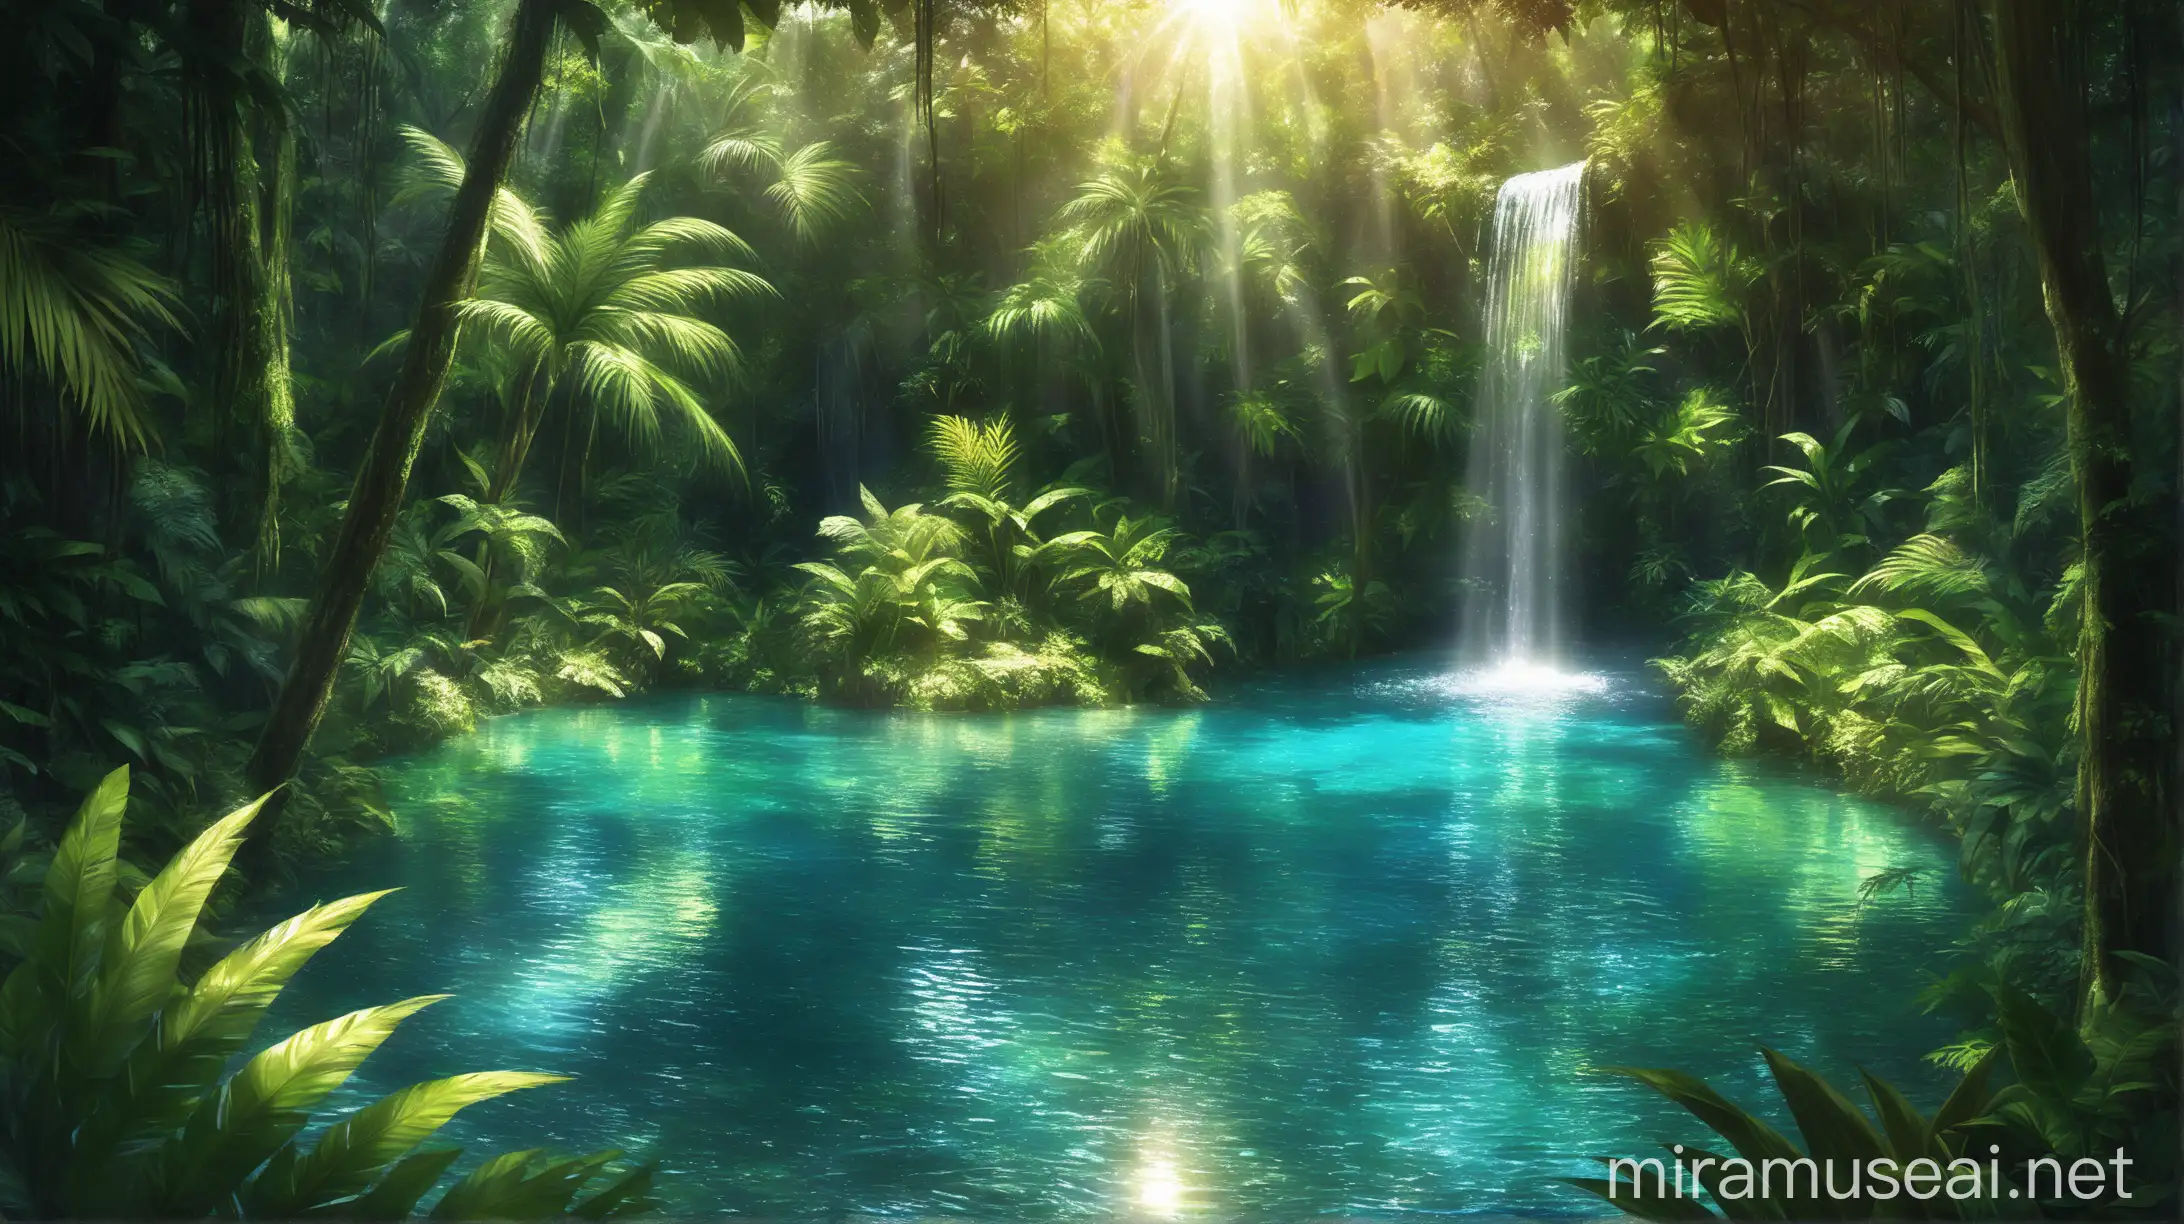 A serene tropical waterfall cascading into a crystal-clear turquoise pool, surrounded by lush, verdant greenery in Guadeloupe. The setting is a secluded, tranquil spot deep within a vibrant rainforest. Sunlight filters through the dense canopy above, casting dappled light onto the water and the surrounding foliage. The atmosphere should evoke a sense of peaceful solitude and natural beauty, highlighting the pristine and untouched environment. The image should capture the vivid colors and intricate details of the foliage and water, creating a realistic yet enchanting scene.